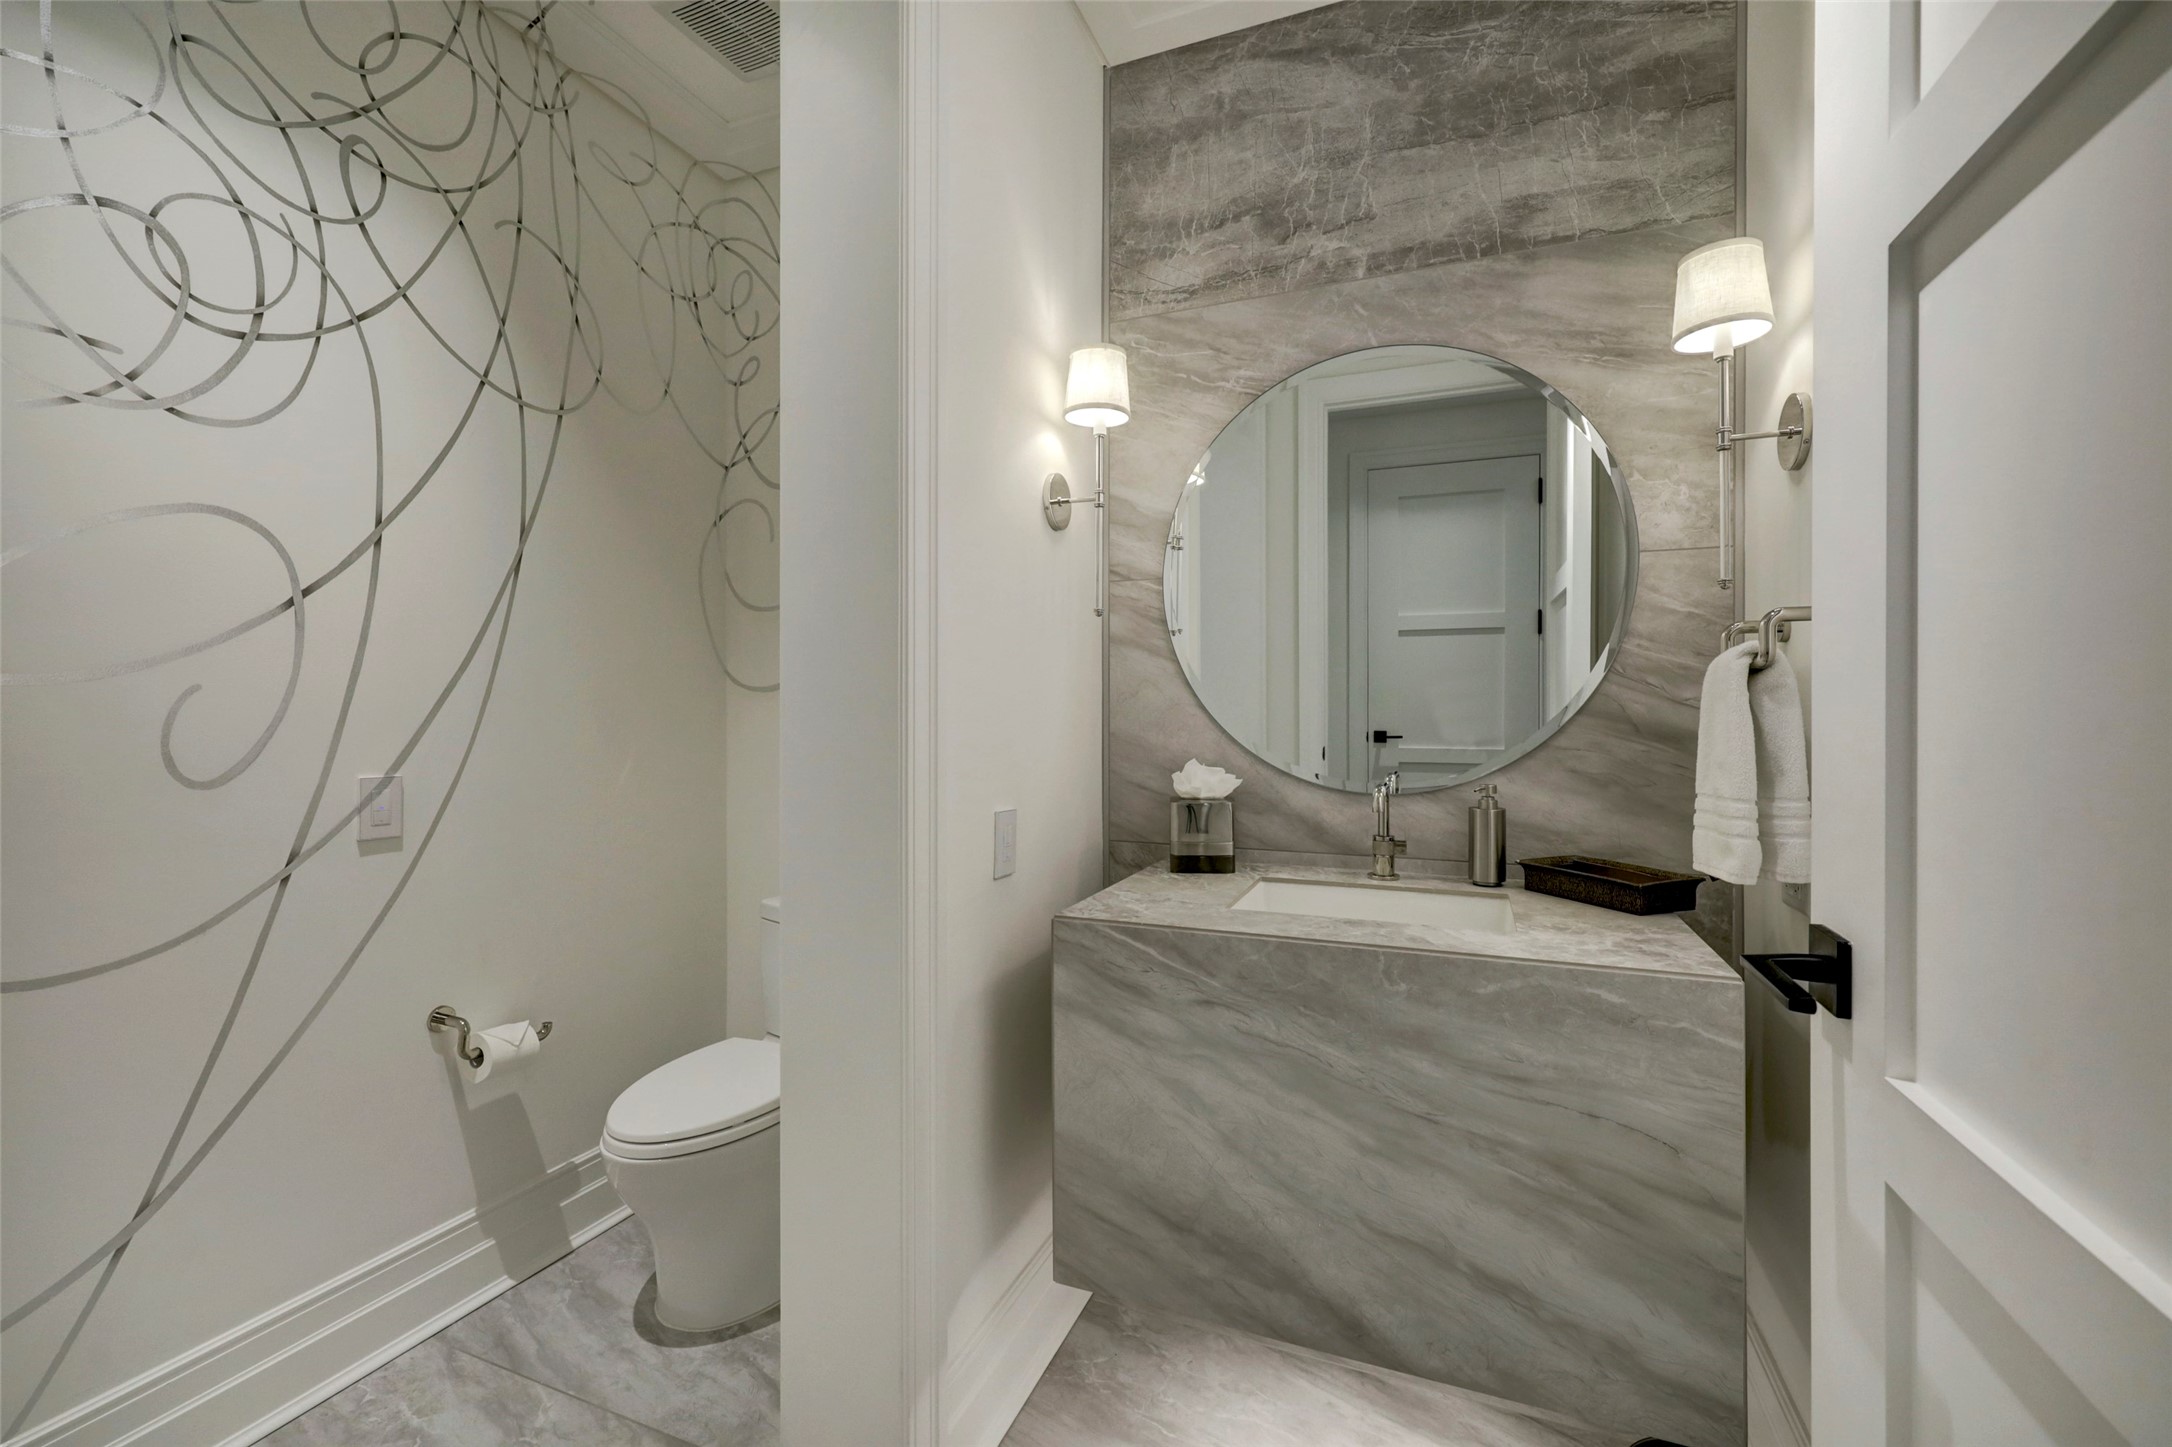 The Powder Bath includes a floating stone vanity, custom hardware and lighting, plus a whimsical mural.